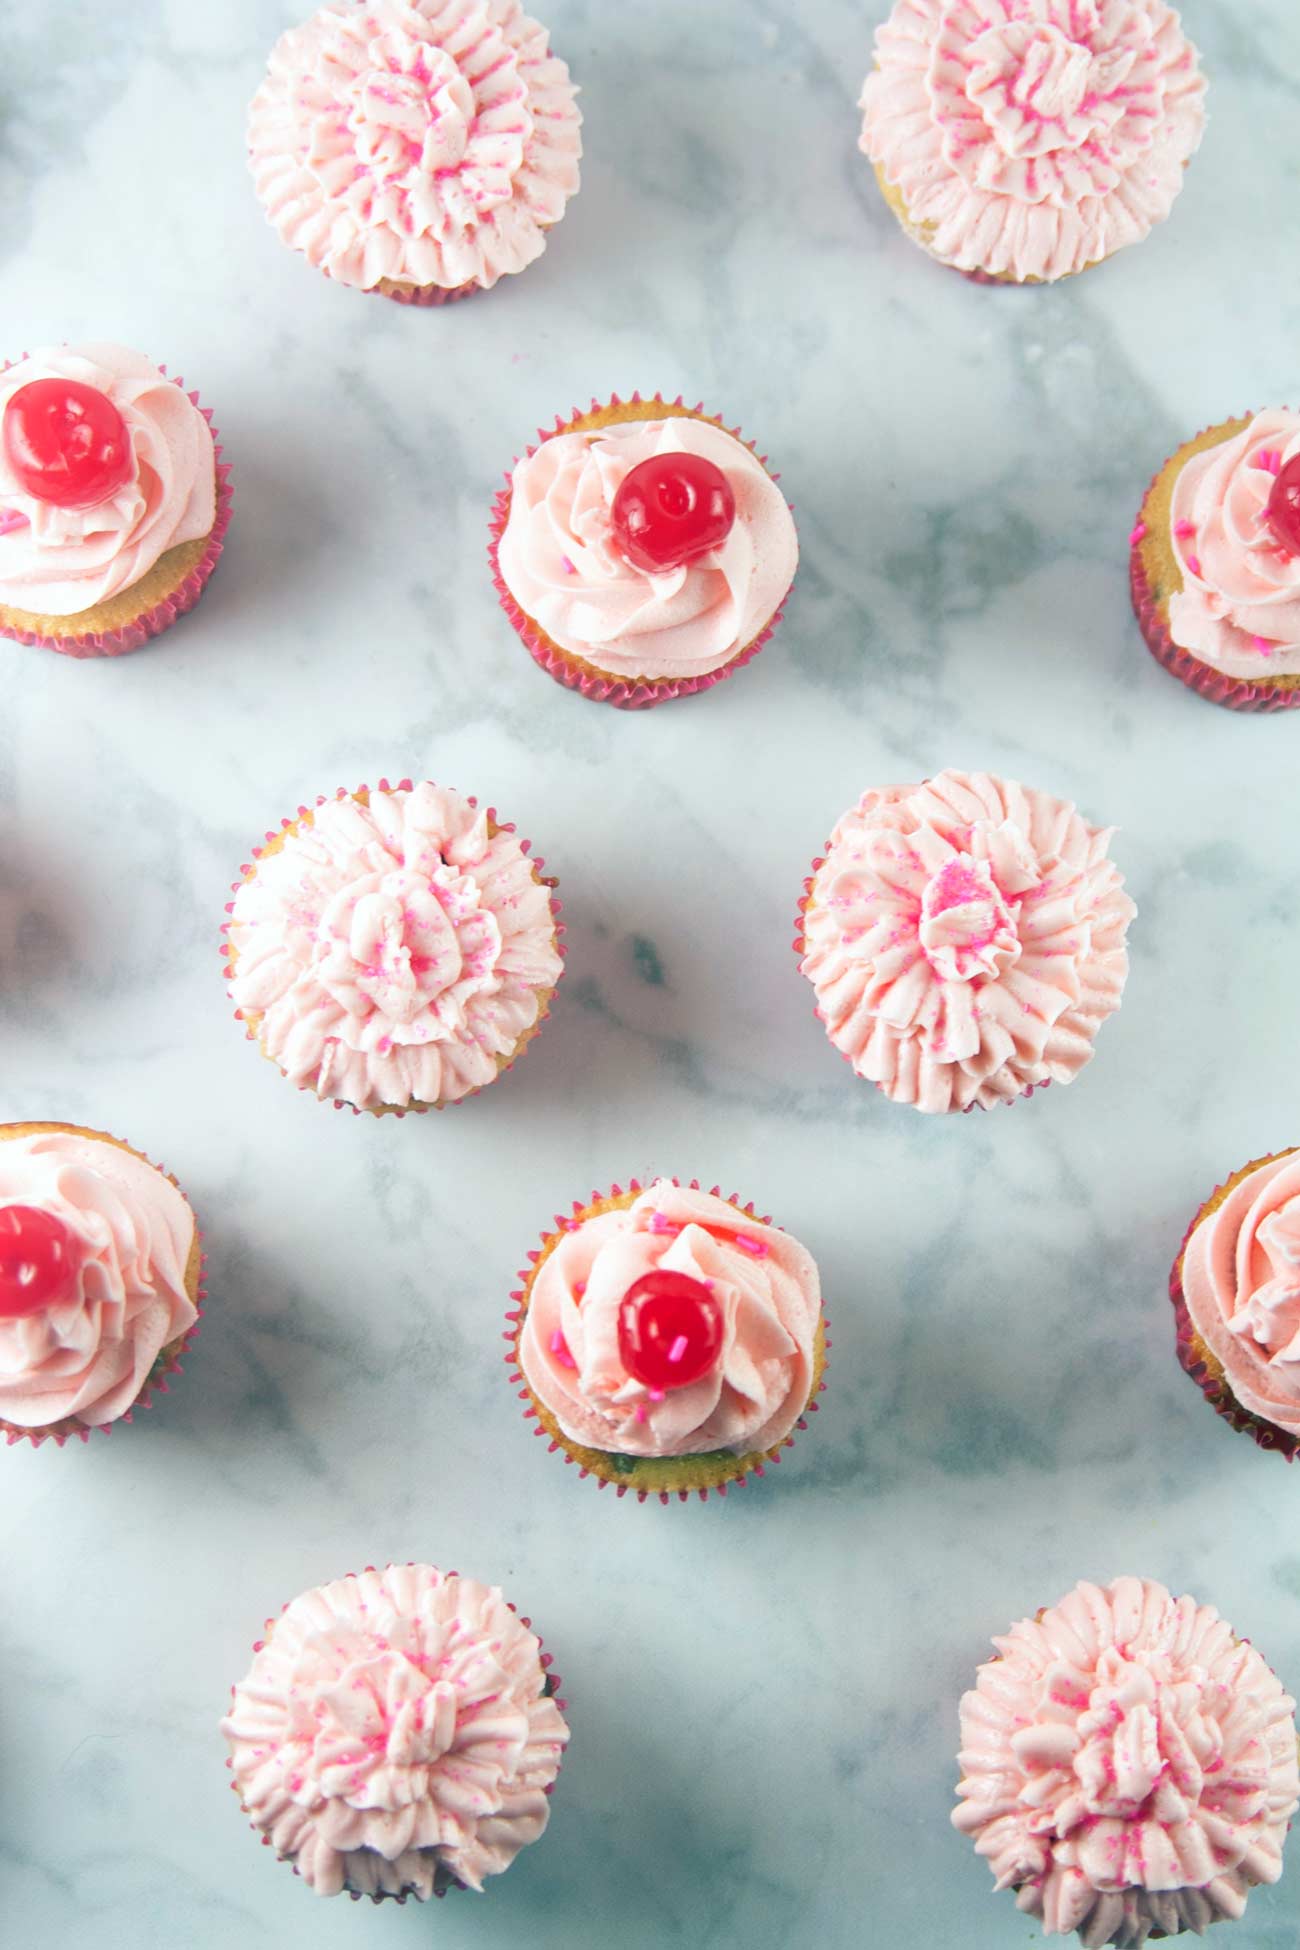 Chocolate Chip Cherry Cupcakes: vanilla-speckled cupcakes studded with mini chocolate chips and a pile of fluffy cherry buttercream. Top with a cherry - or bake one right inside! {Bunsen Burner Bakery}